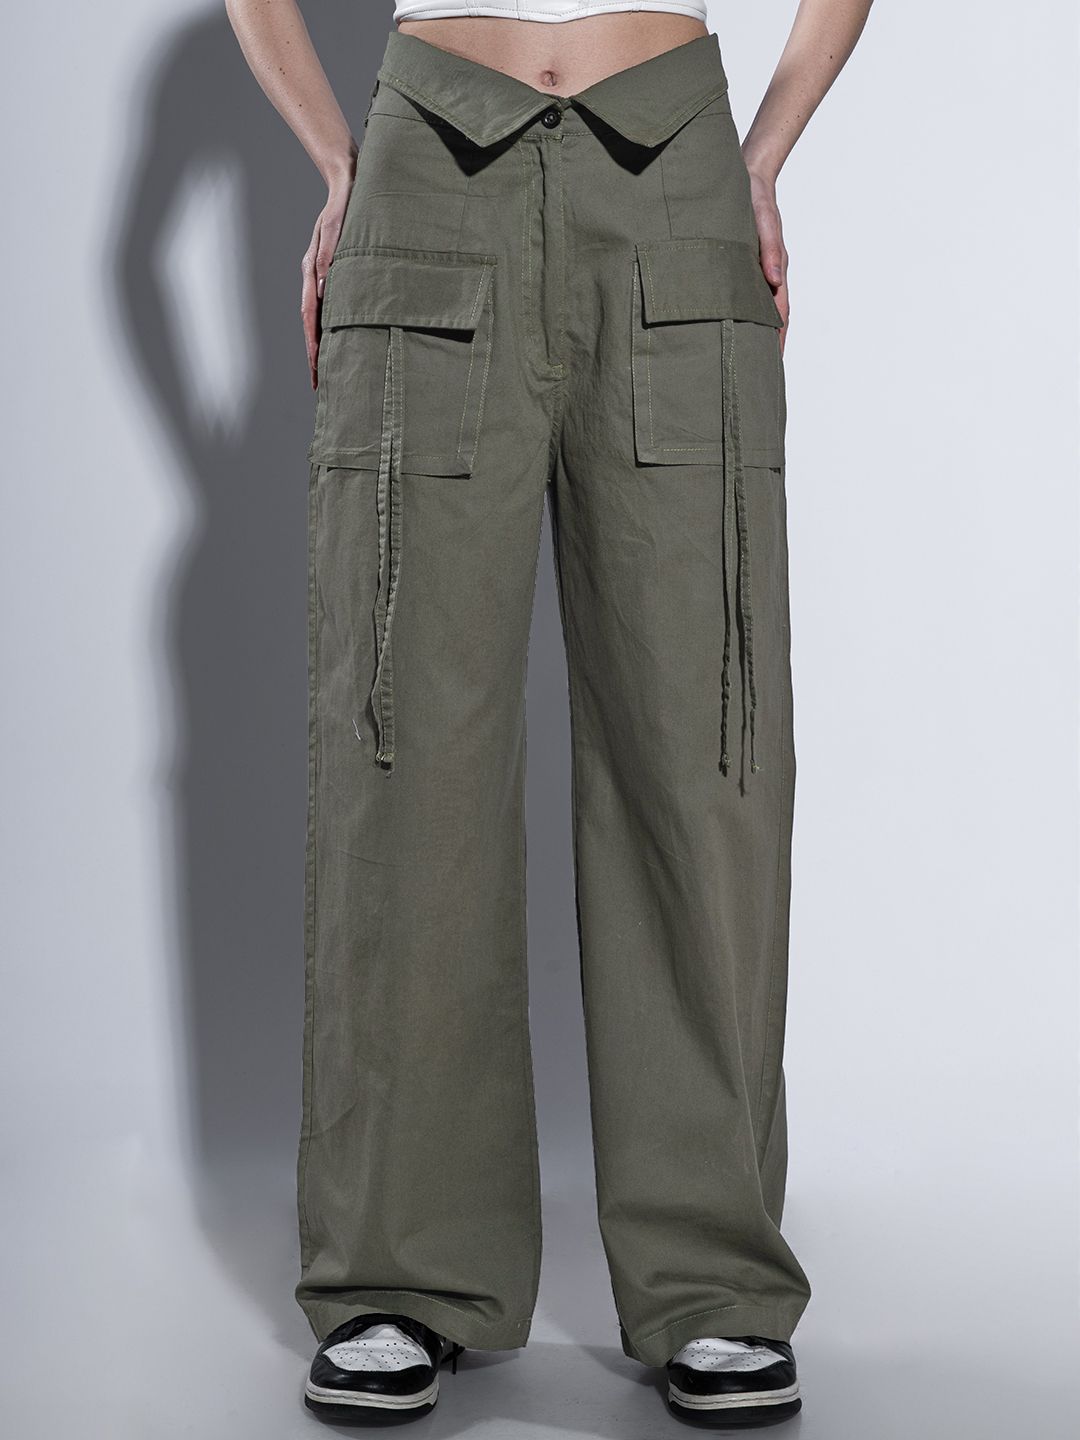 Stylecast X Hersheinbox Women High-Rise Cargo Trousers Price in India